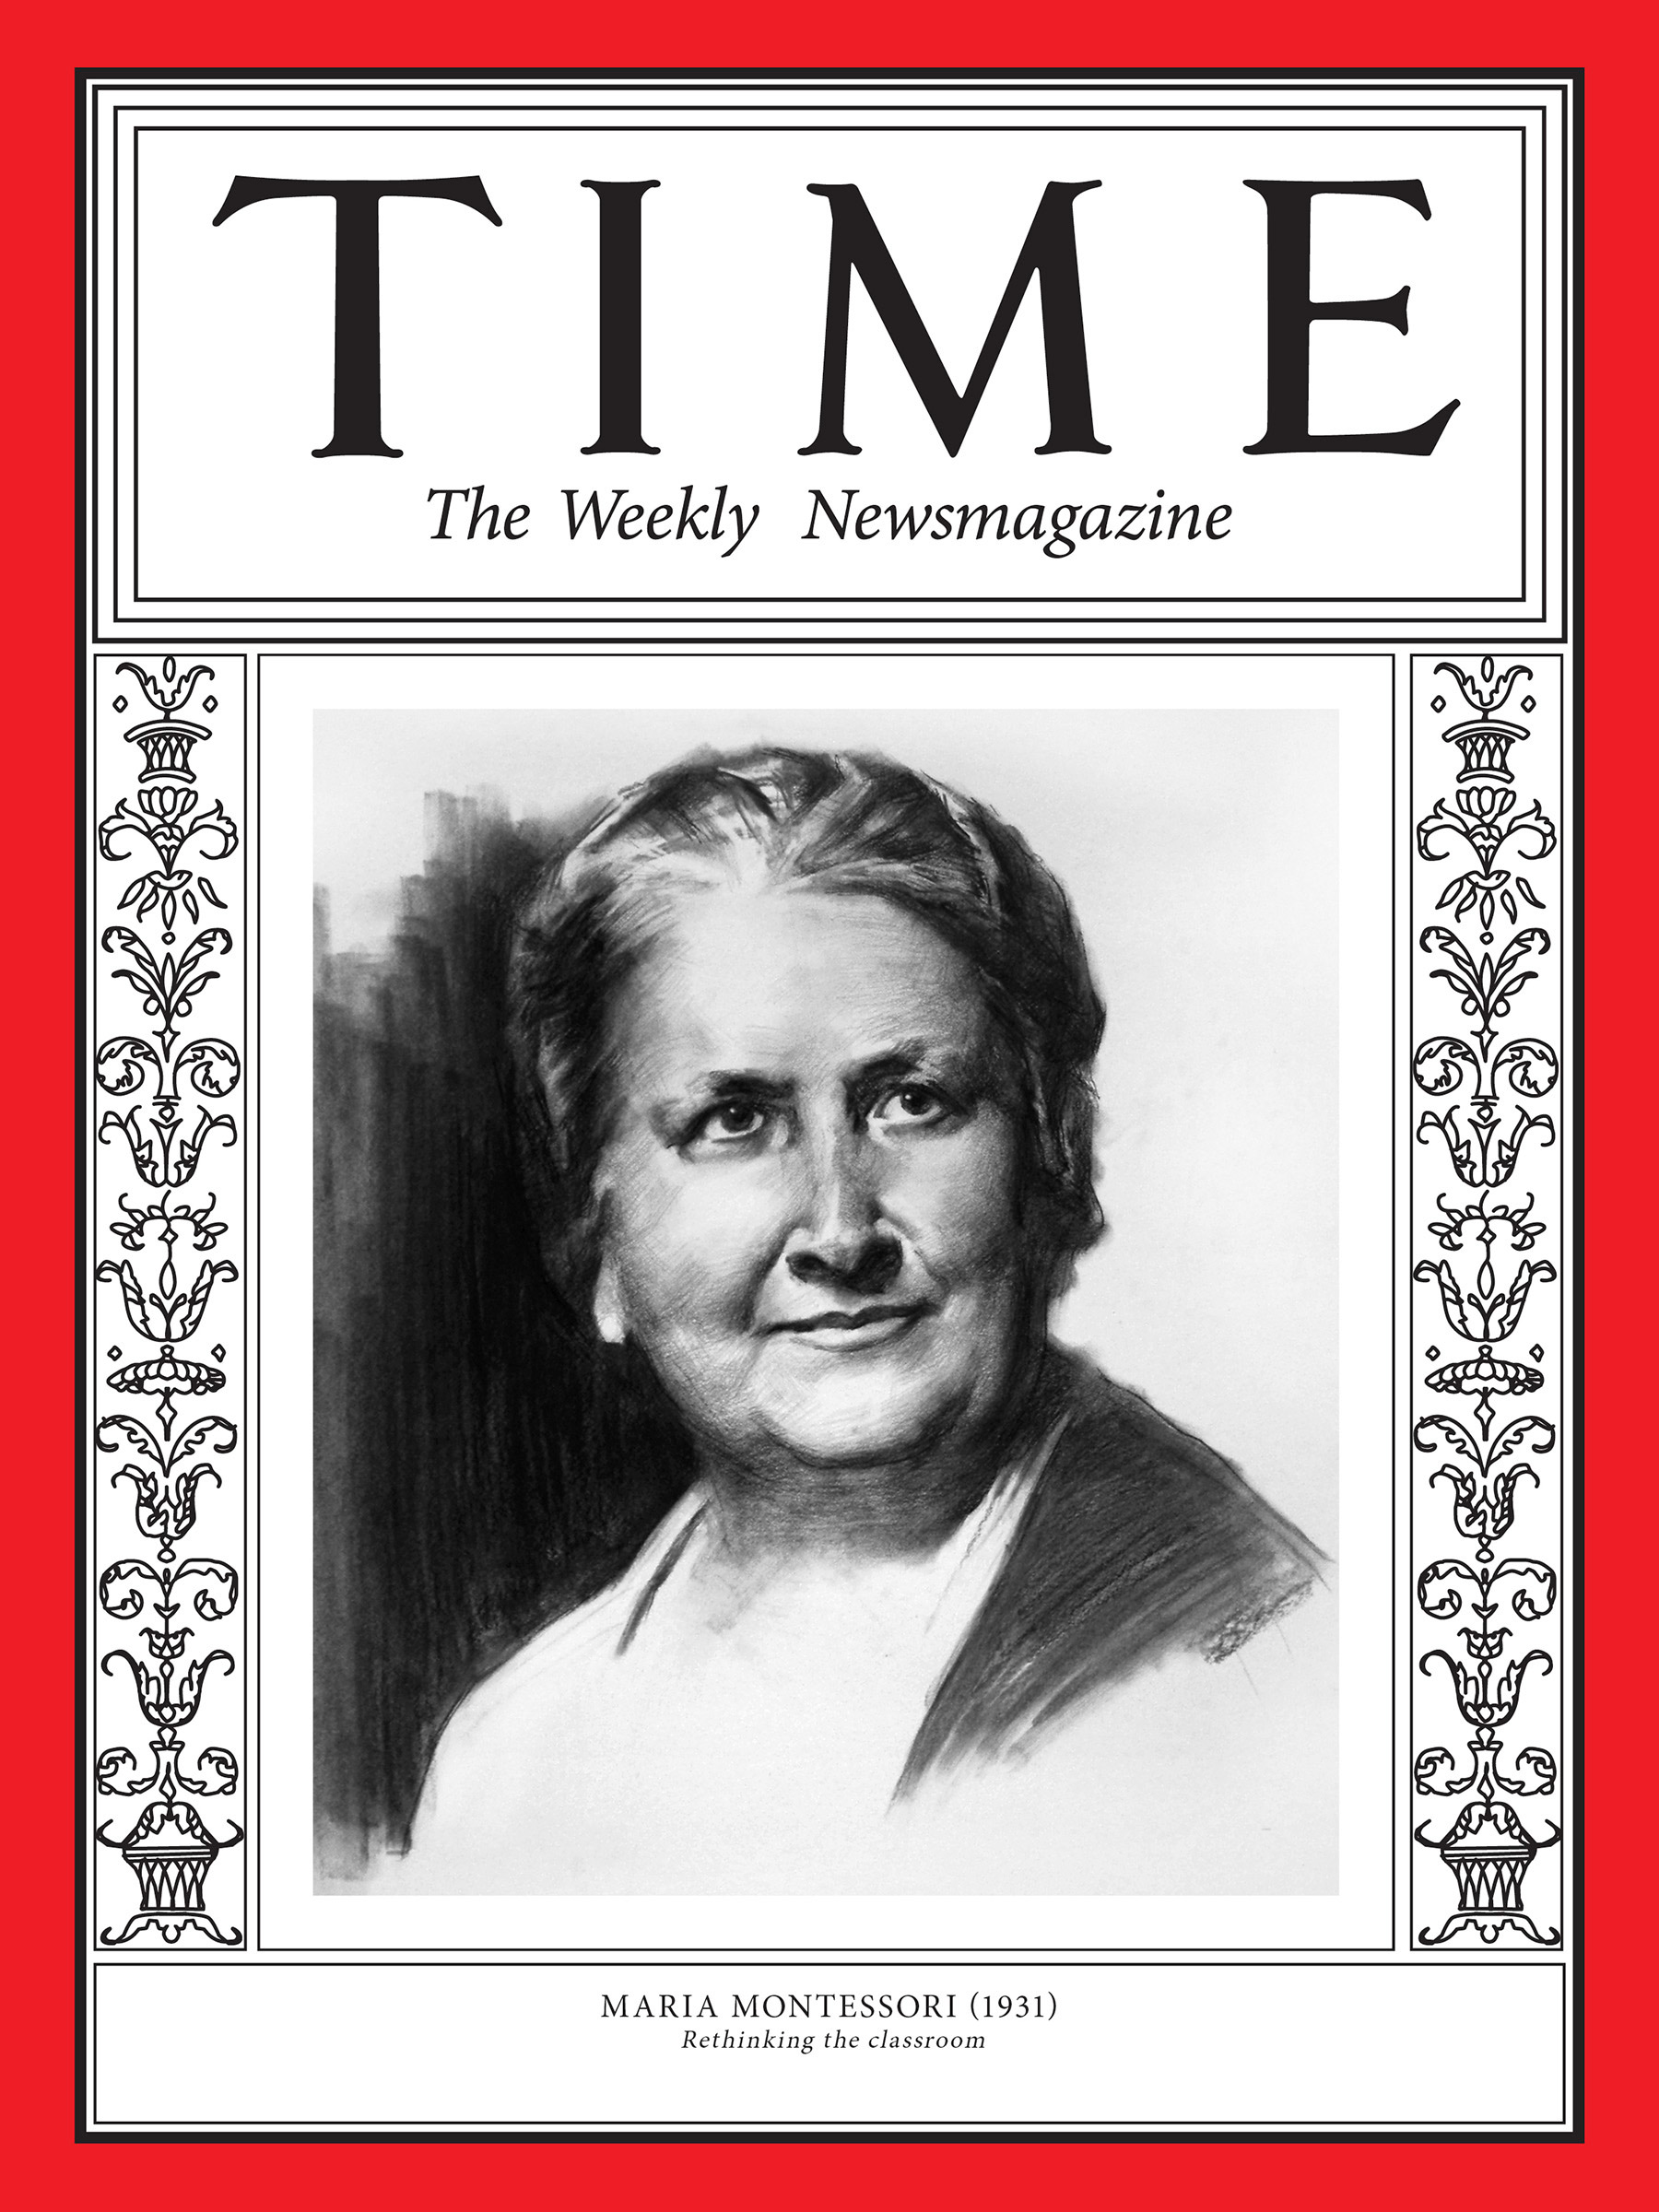 <a href="https://fineartamerica.com/featured/maria-montessori-1931-time.html"><strong>Buy the cover art→</strong></a> (Illustration by Matt Smith for TIME; Ullstein Bild/Getty)